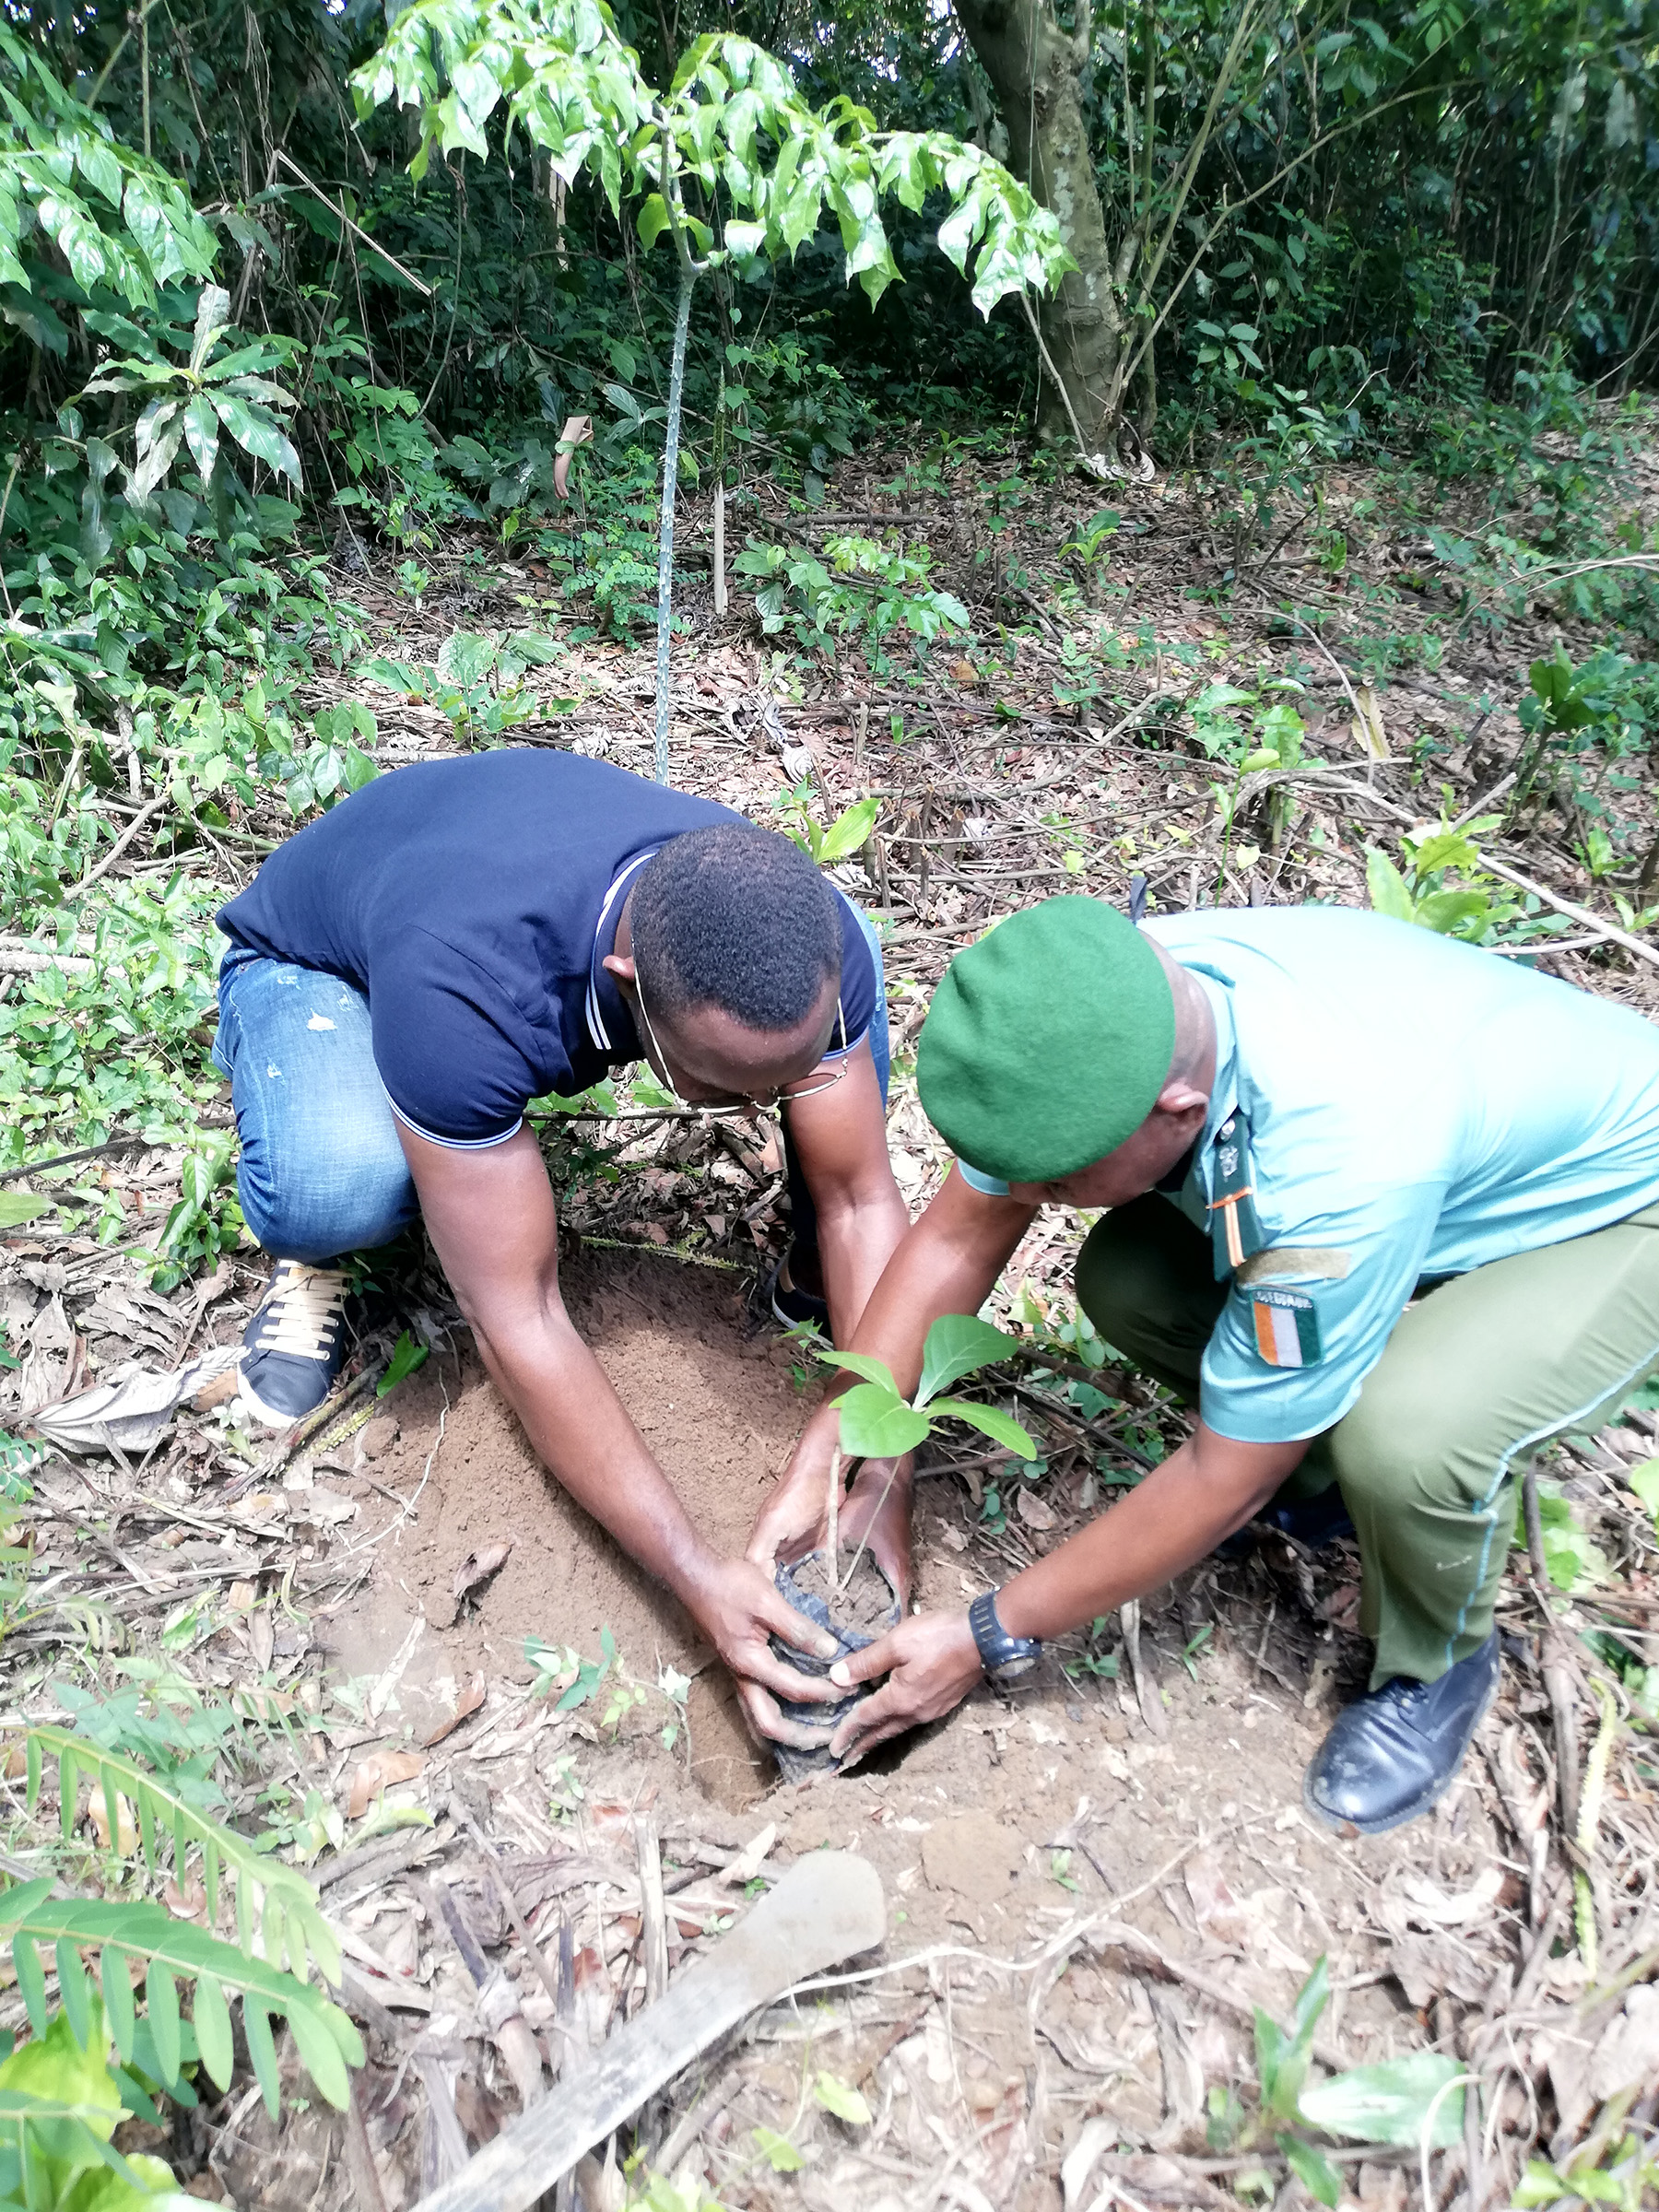 Laying the ground for landscape restoration in Côte d’Ivoire